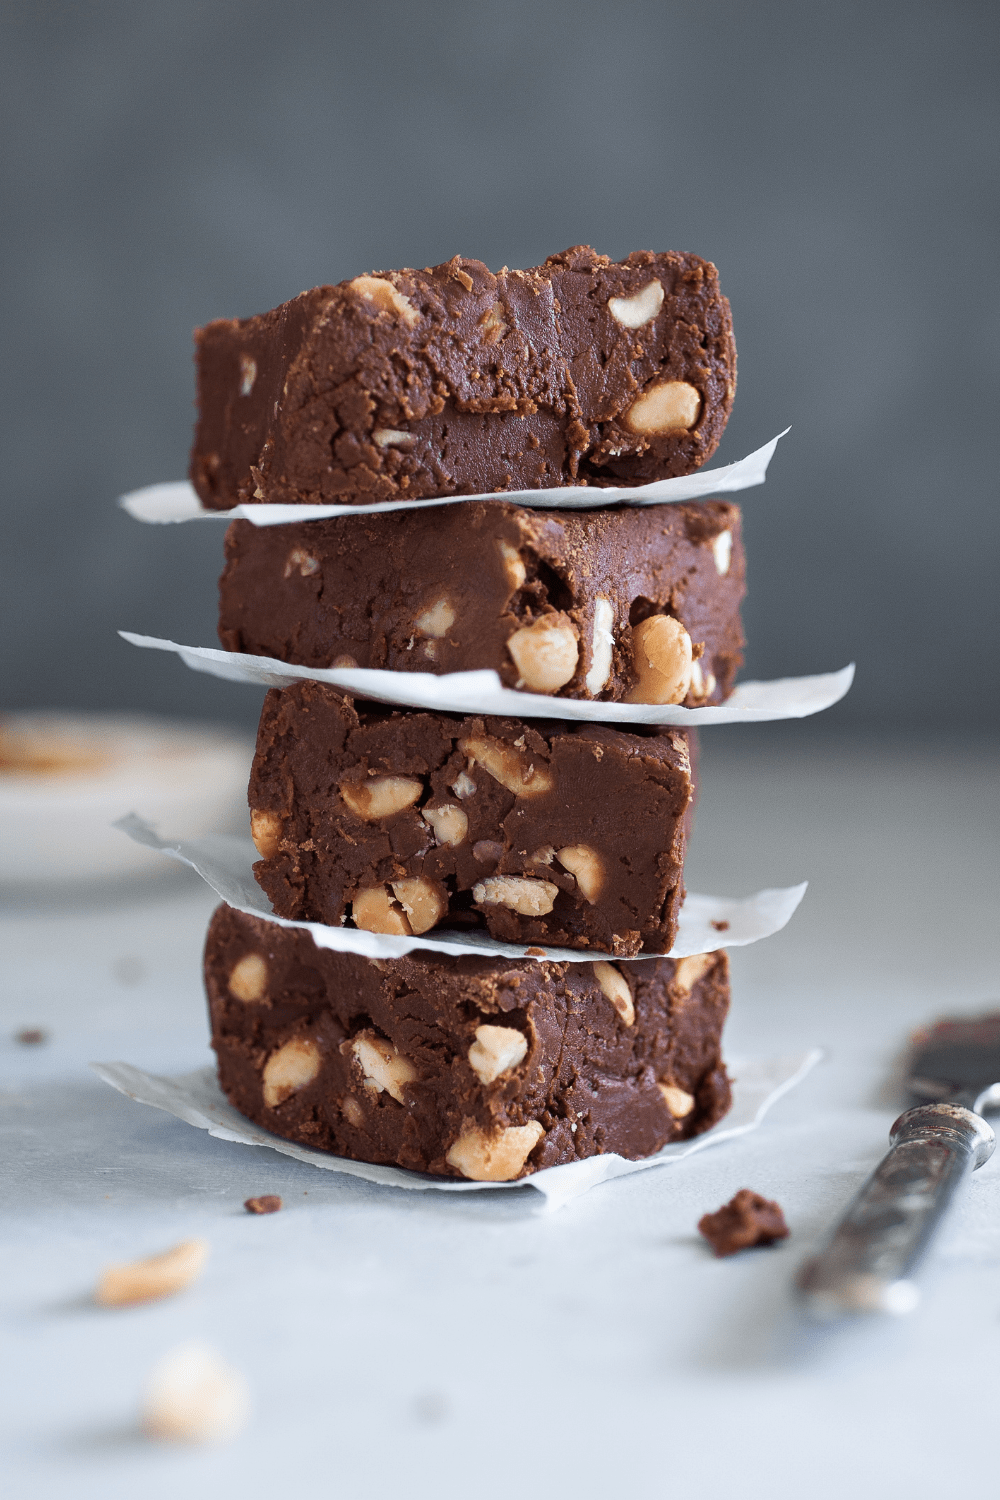 Stacked of chocolate bars with nuts